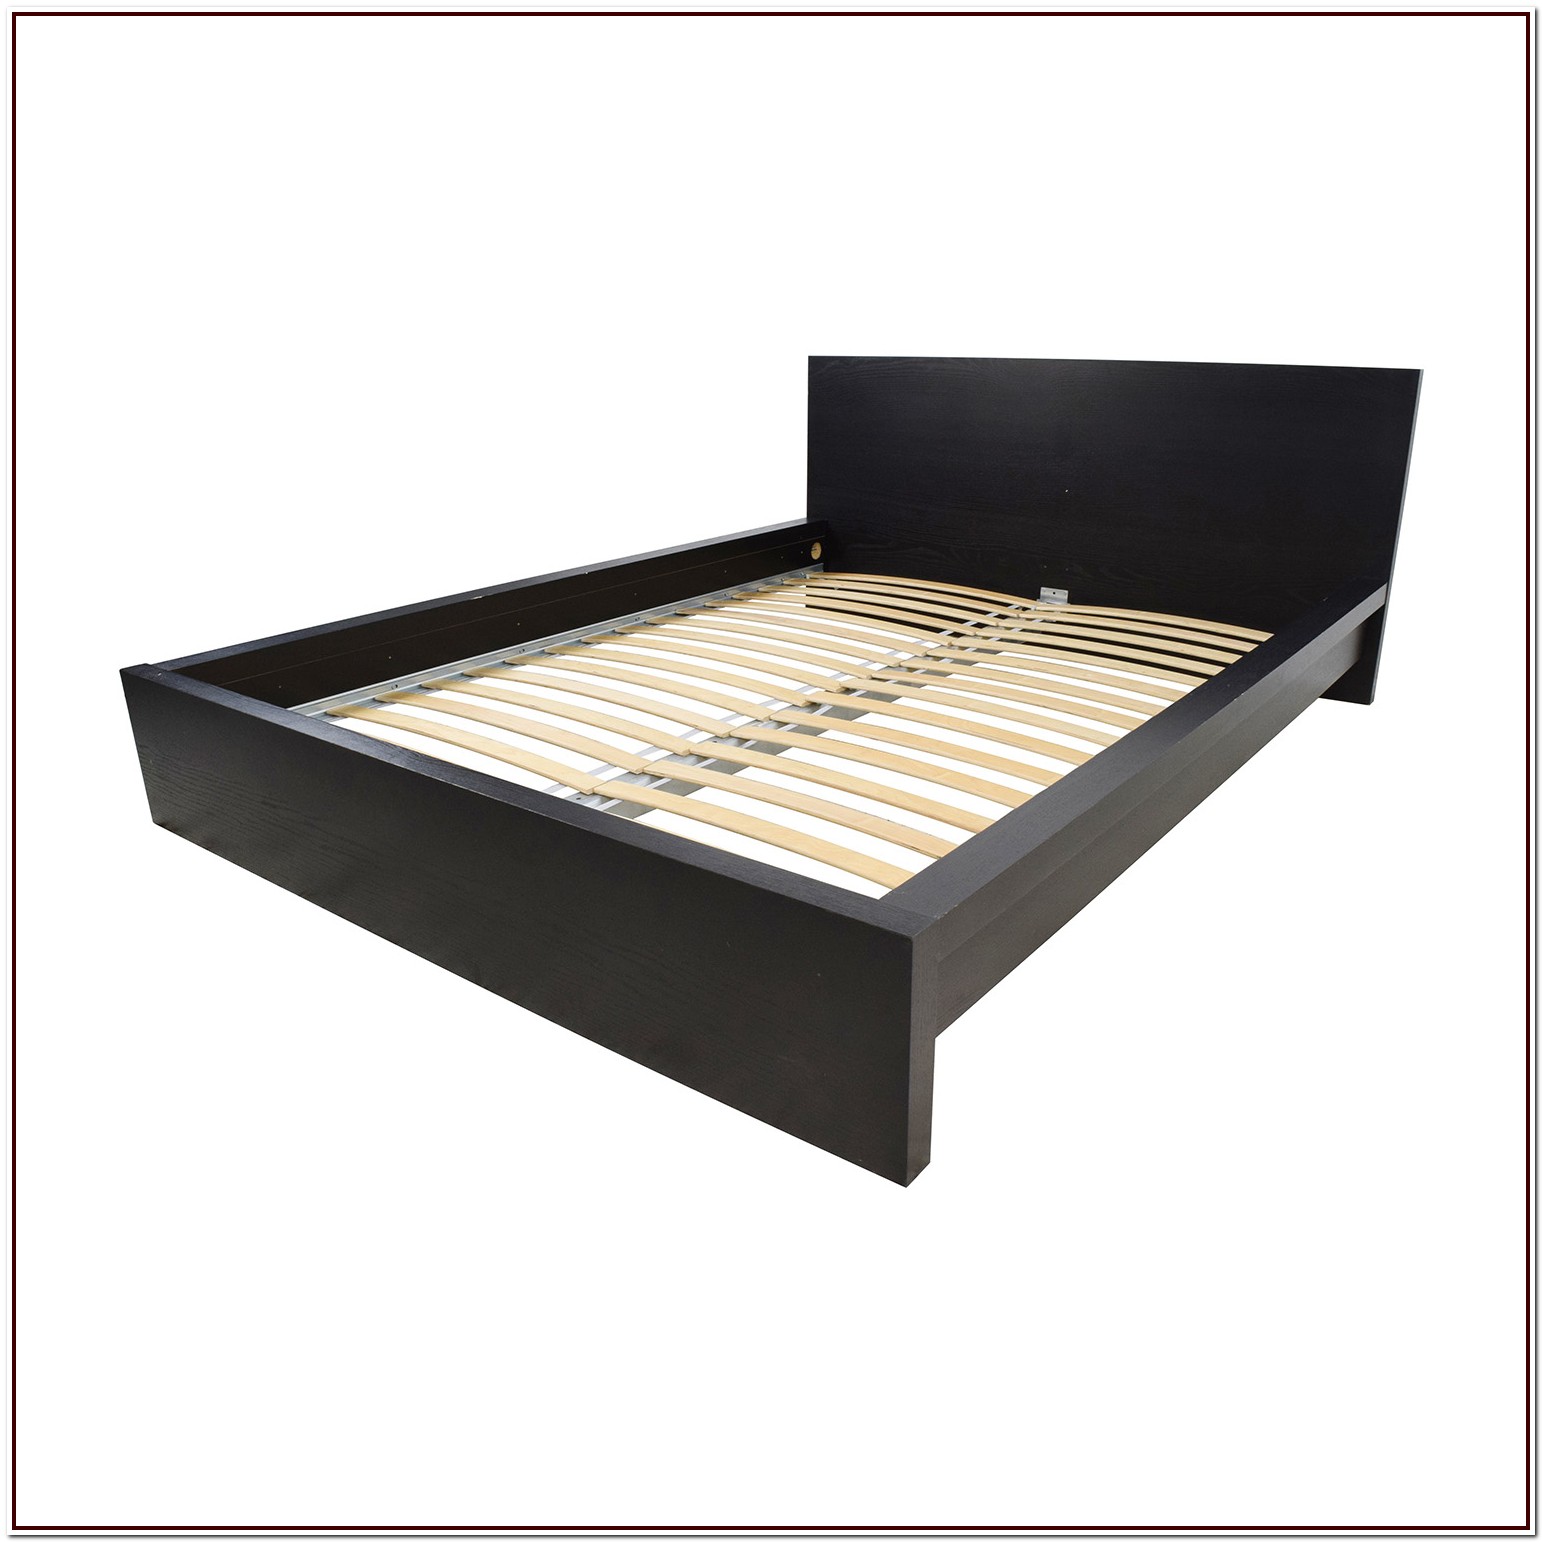 Malm king size bed instructions